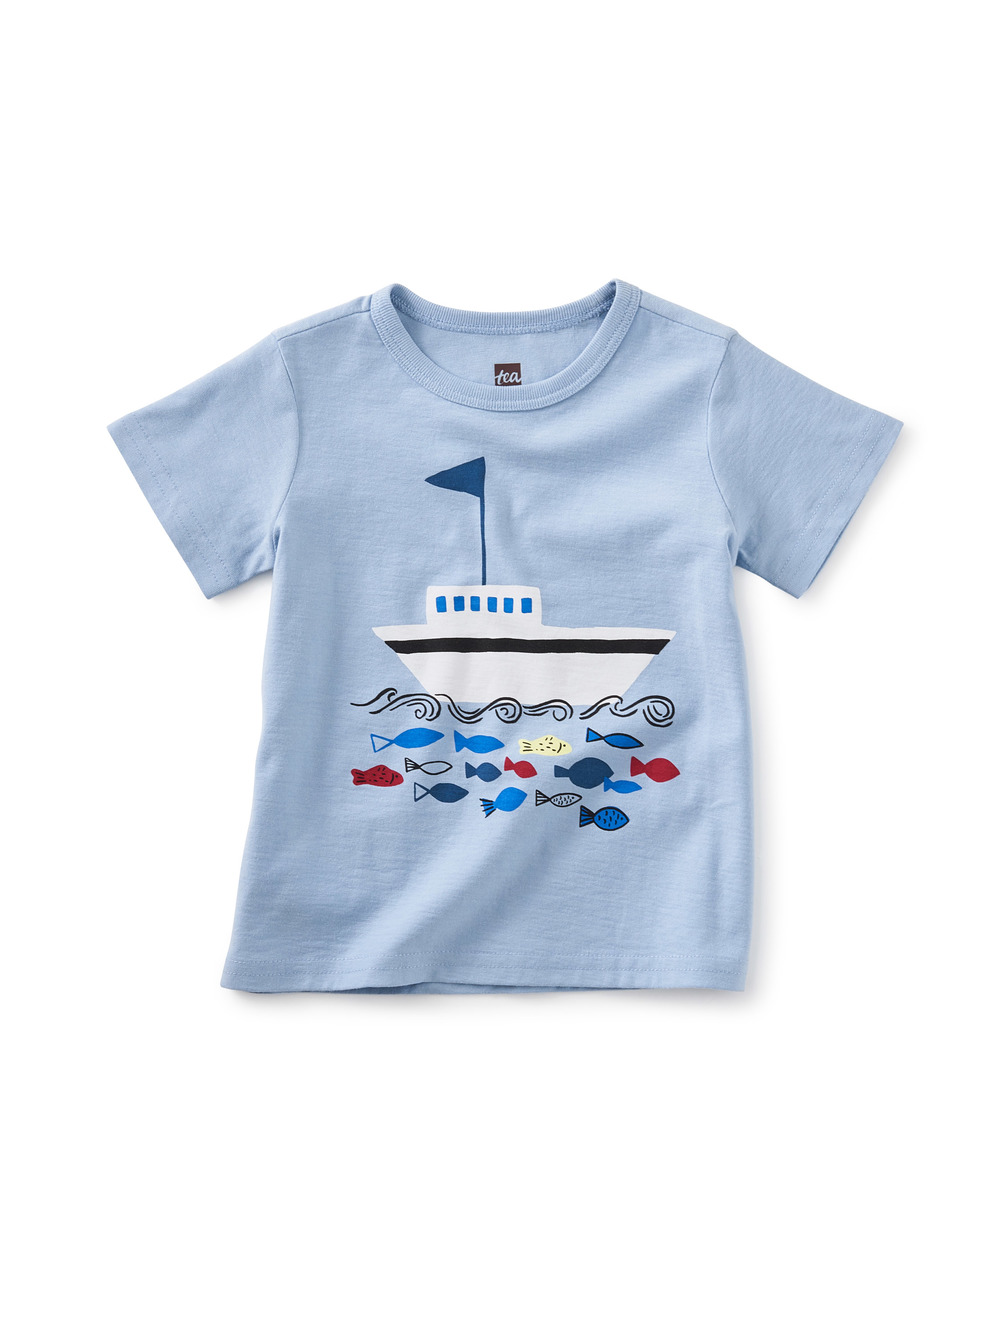 Seas the Day Baby Graphic Tee | Tea Collection